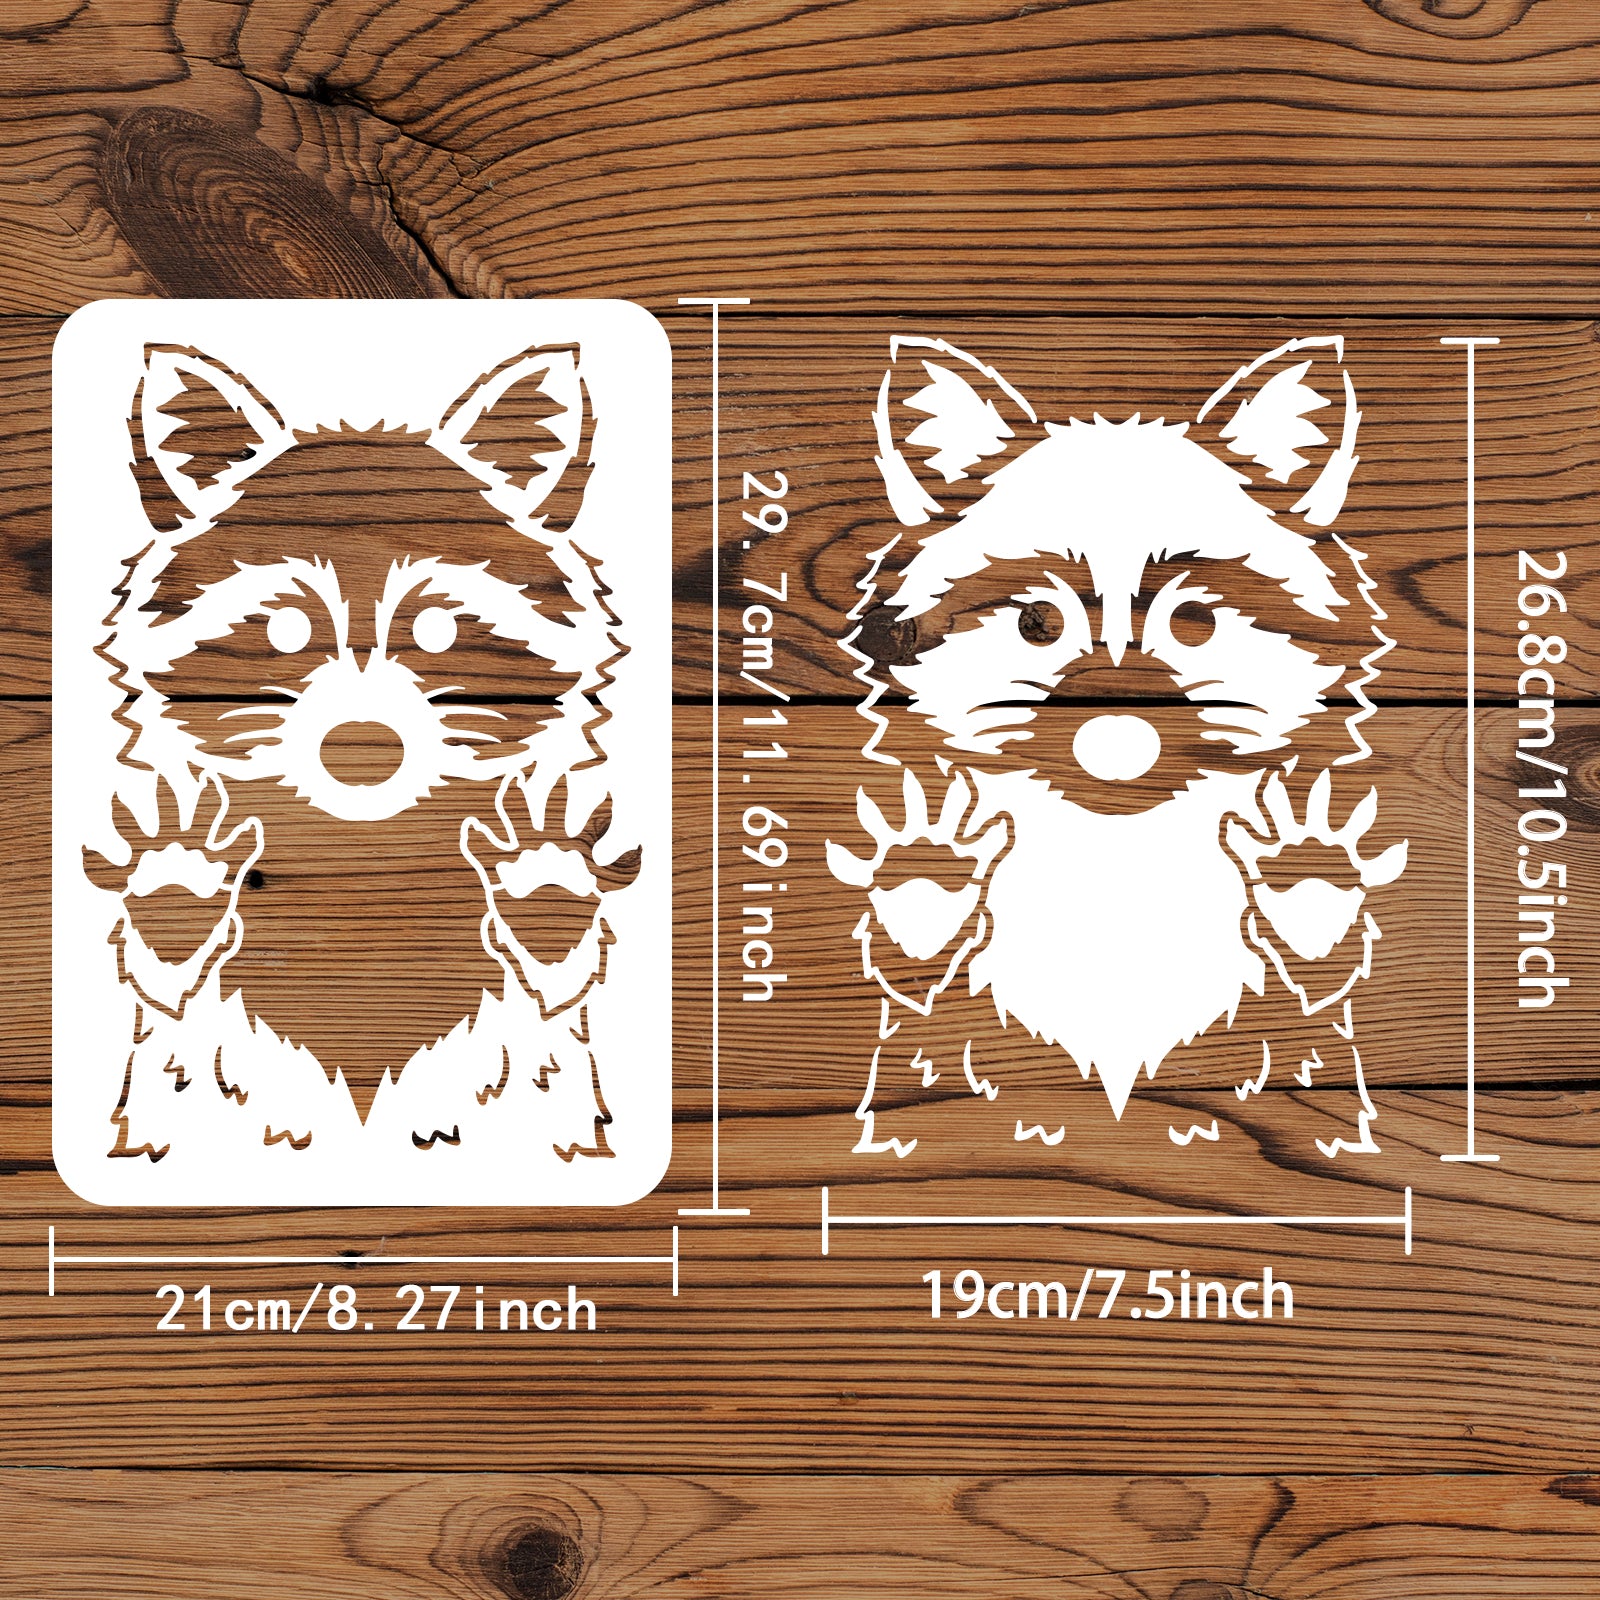 Globleland Plastic Reusable Drawing Painting Stencils Templates, for Painting on Fabric Tiles Floor Furniture Wood, Rectangle, Raccoon Pattern, 297x210mm